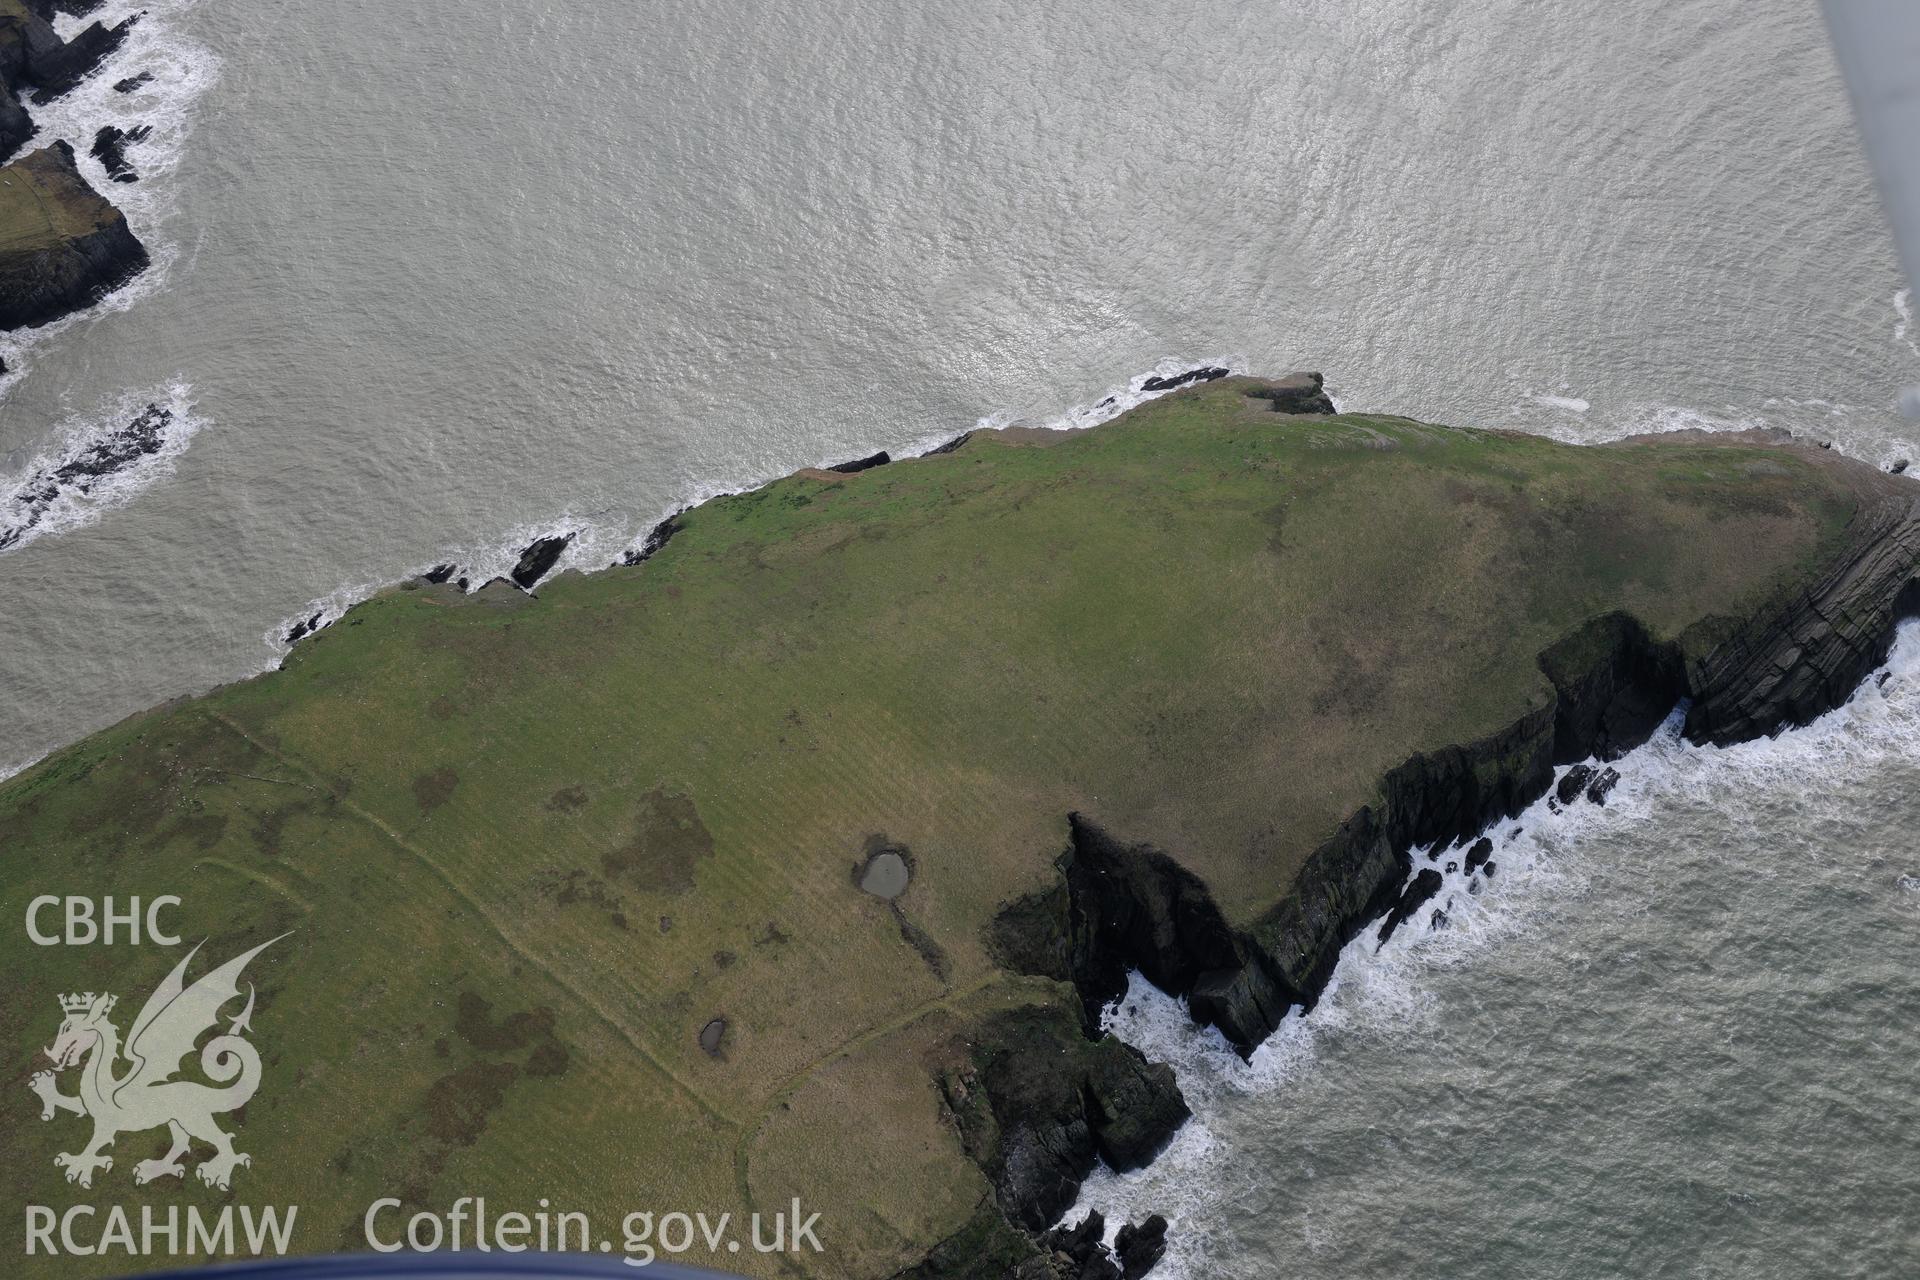 Cardigan Island. From a set of oblique aerial orbital photographs taken for "structure from motion" processing during the Royal Commission's programme of archaeological aerial reconnaissance by Toby Driver on 13th March 2015.